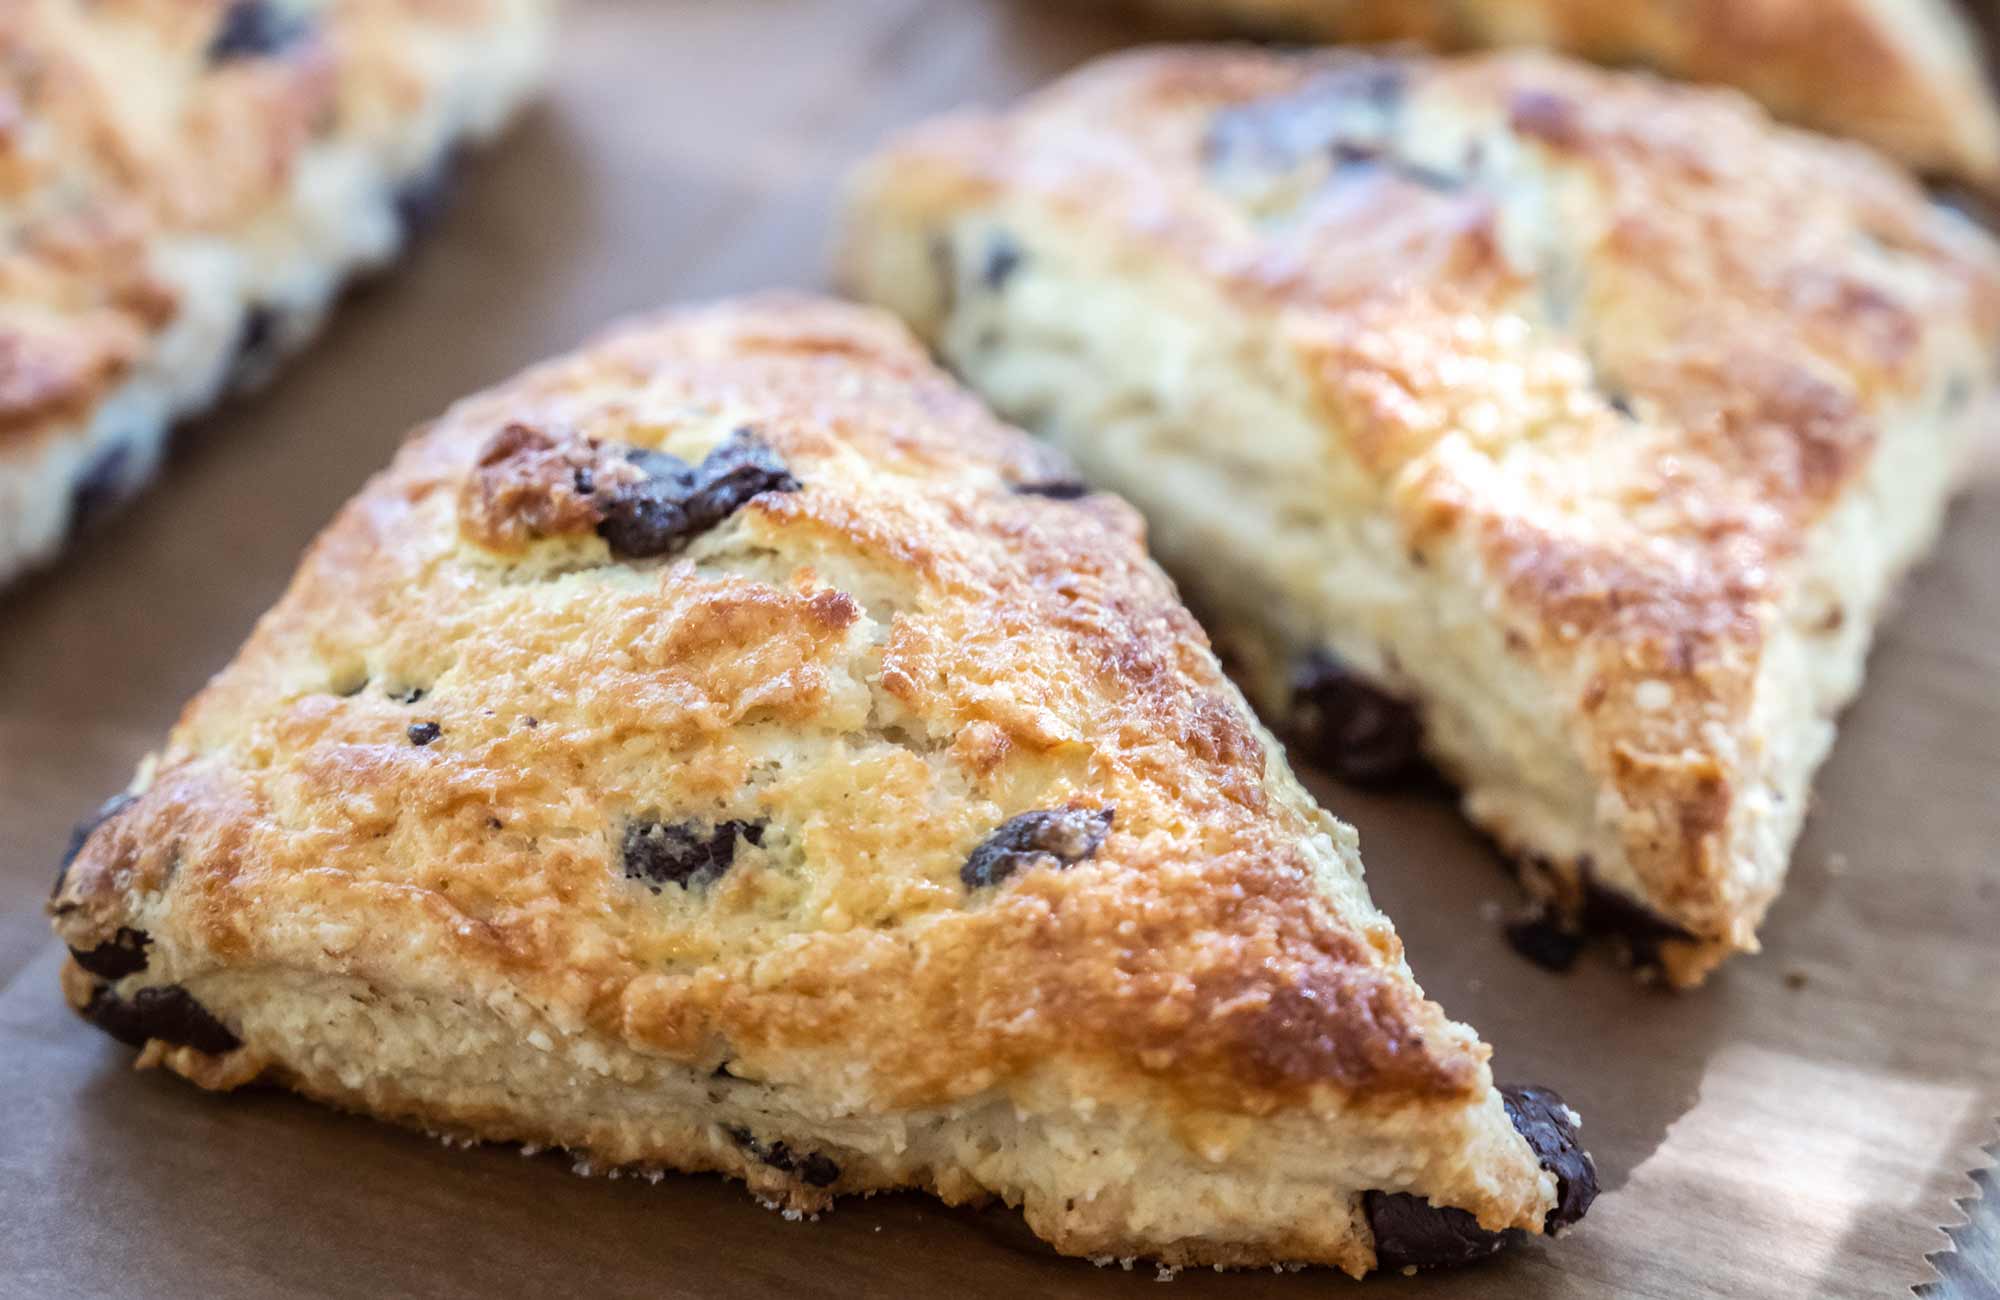 Roasted Pear and Cinnamon Scones with Chocolate Chunks